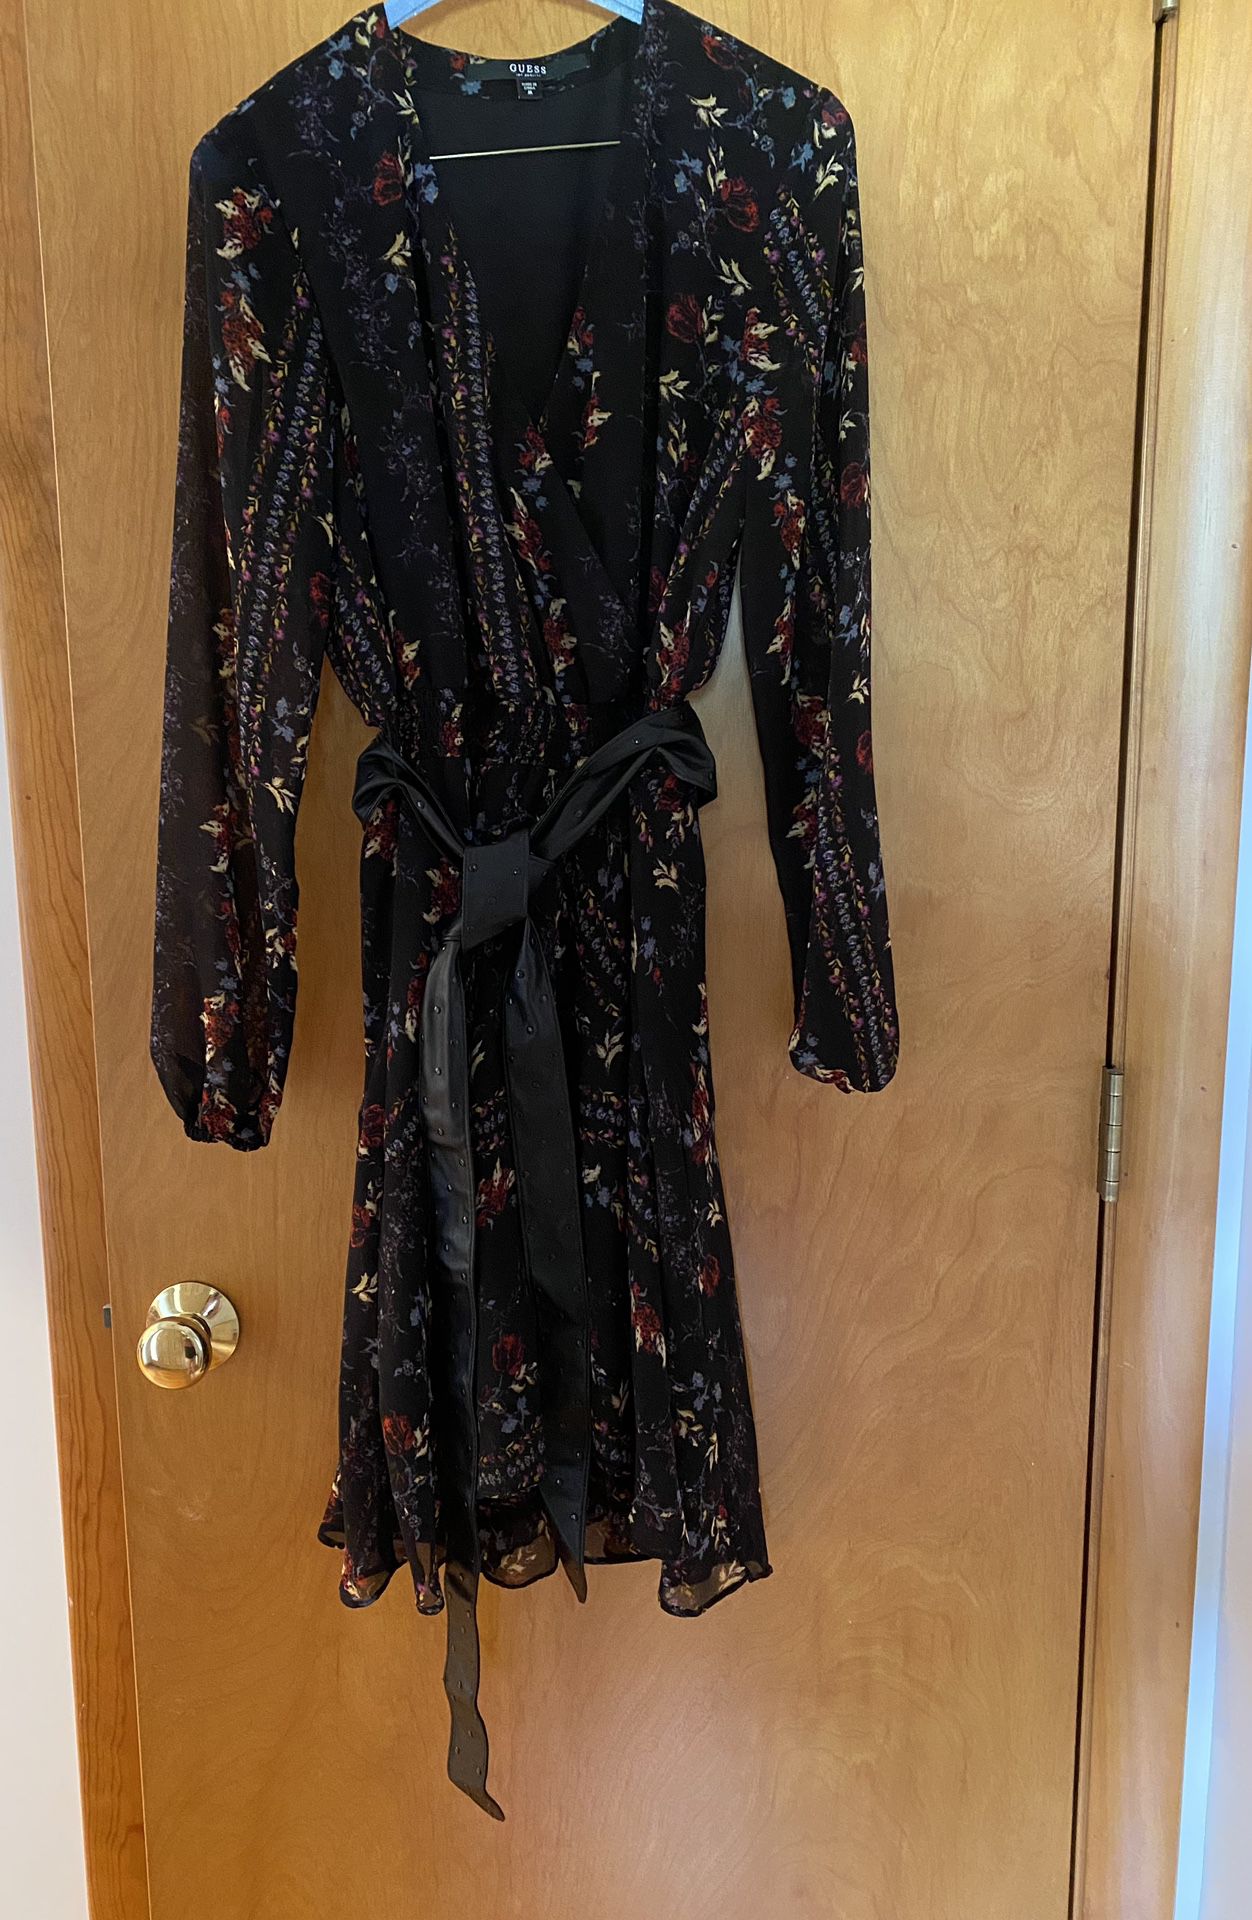 GUESS dress that is PERFECT for a Fall Date Night!